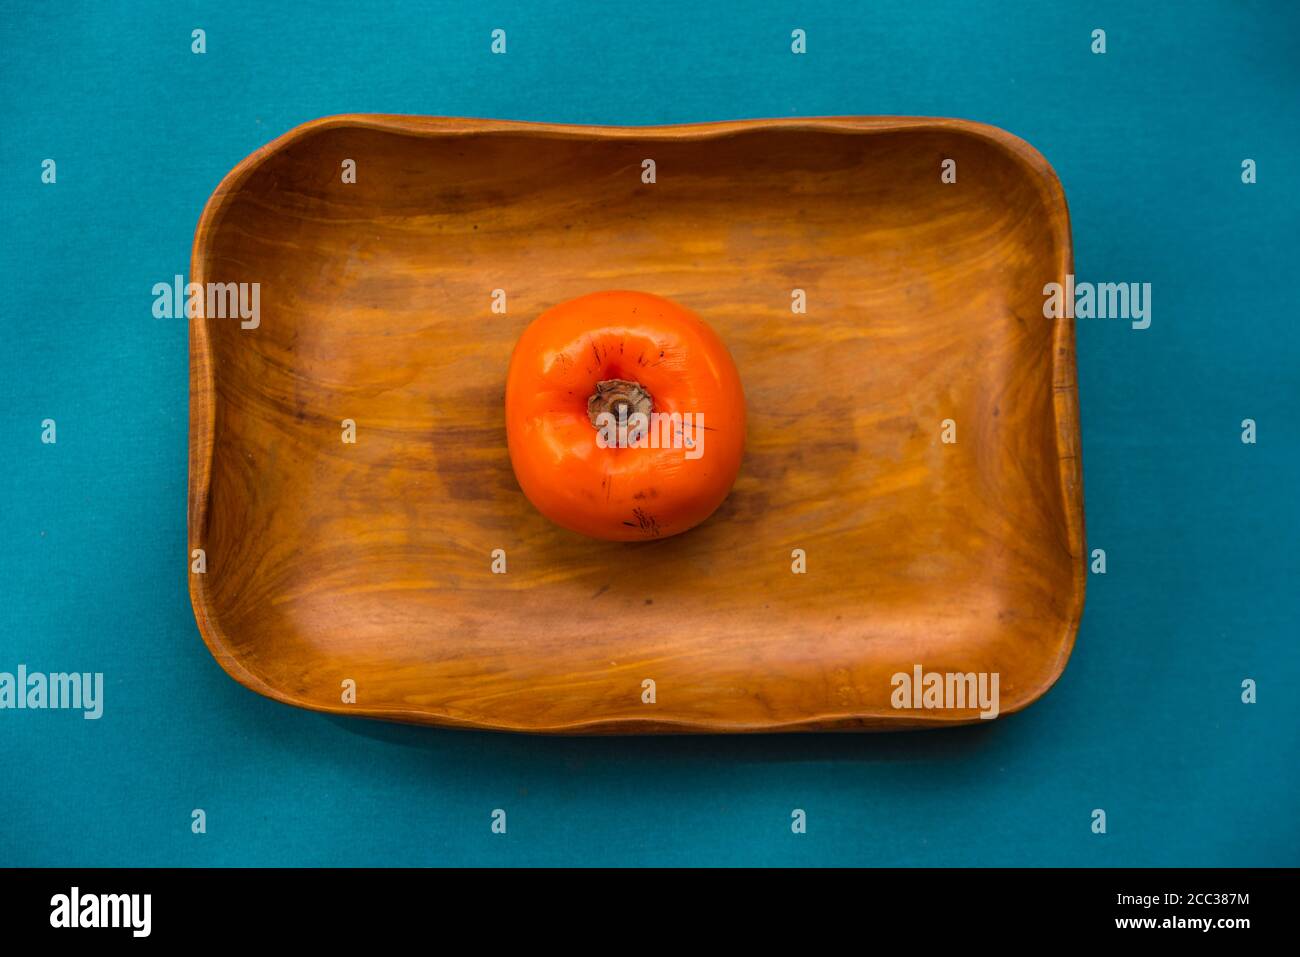 Top view of persimmon fruit in a wood bowl and a blue background. Stock Photo